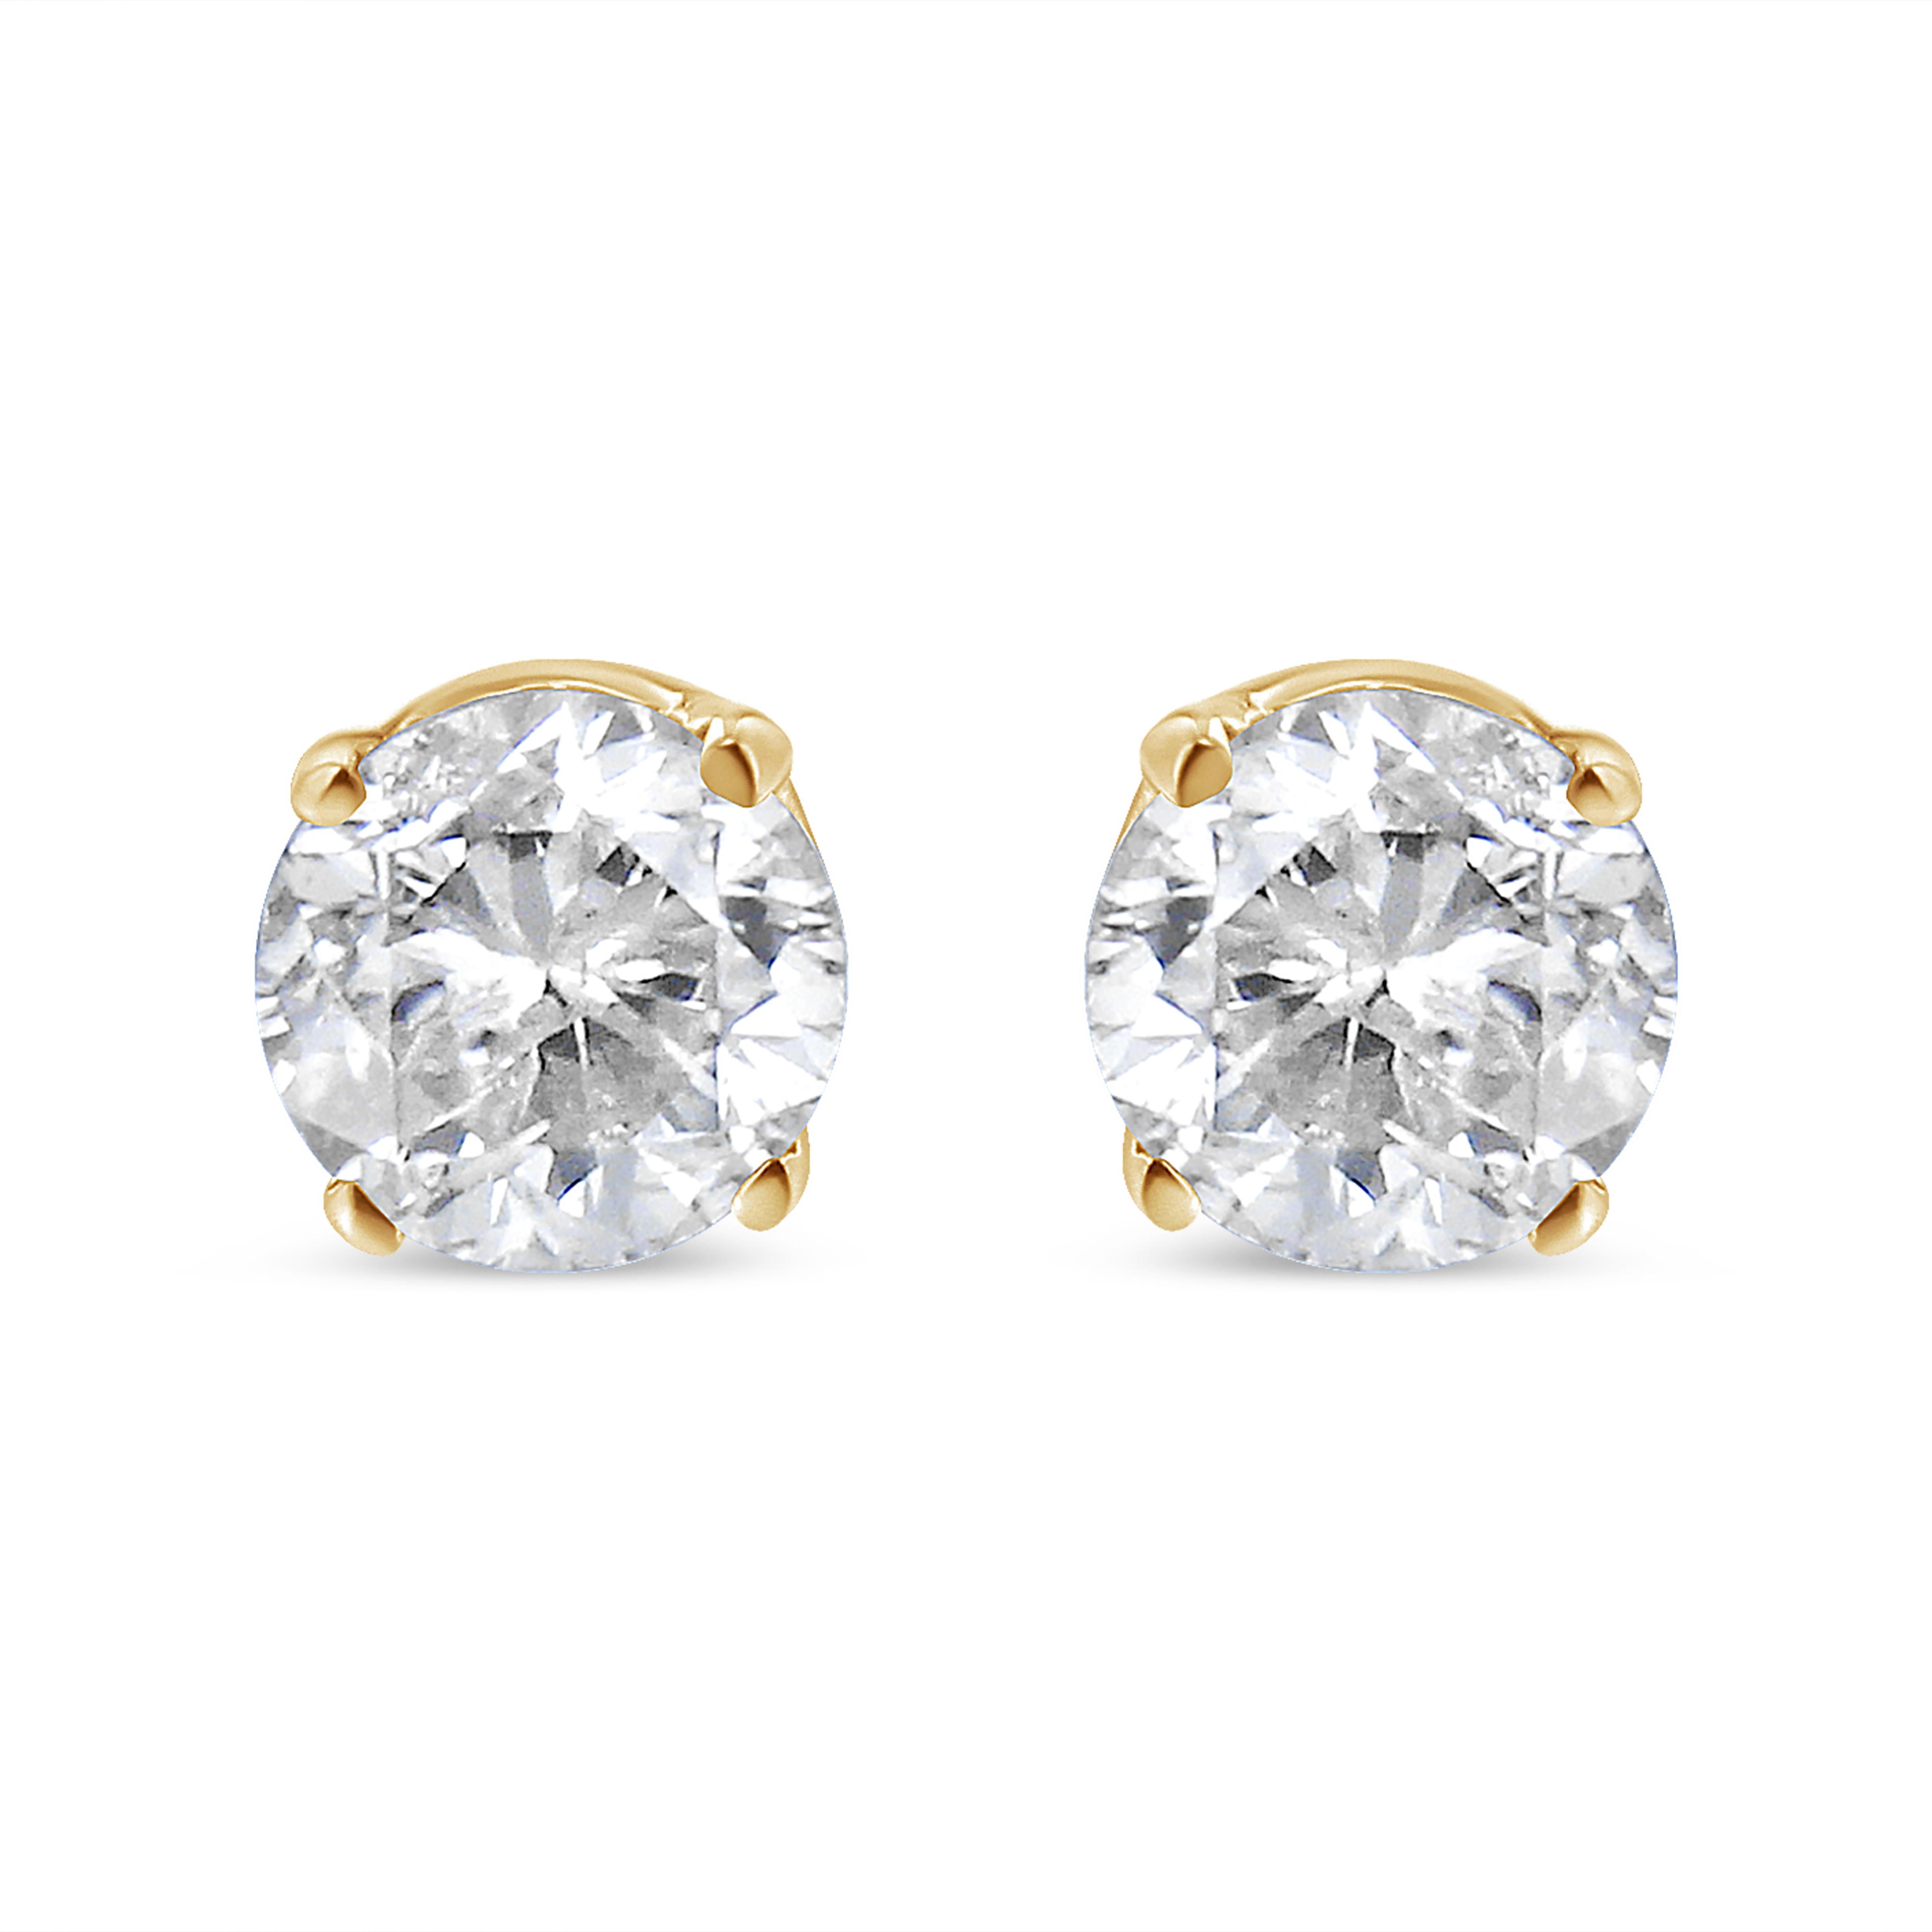 Celebrate any occasion with these classic shimmering diamond stud earrings. Crafted from 14k yellow gold each earring showcases a sparkling round-cut solitaire diamond in a 4-Prong Setting. Dazzling with 1/2 cttw of diamonds and a bright polished